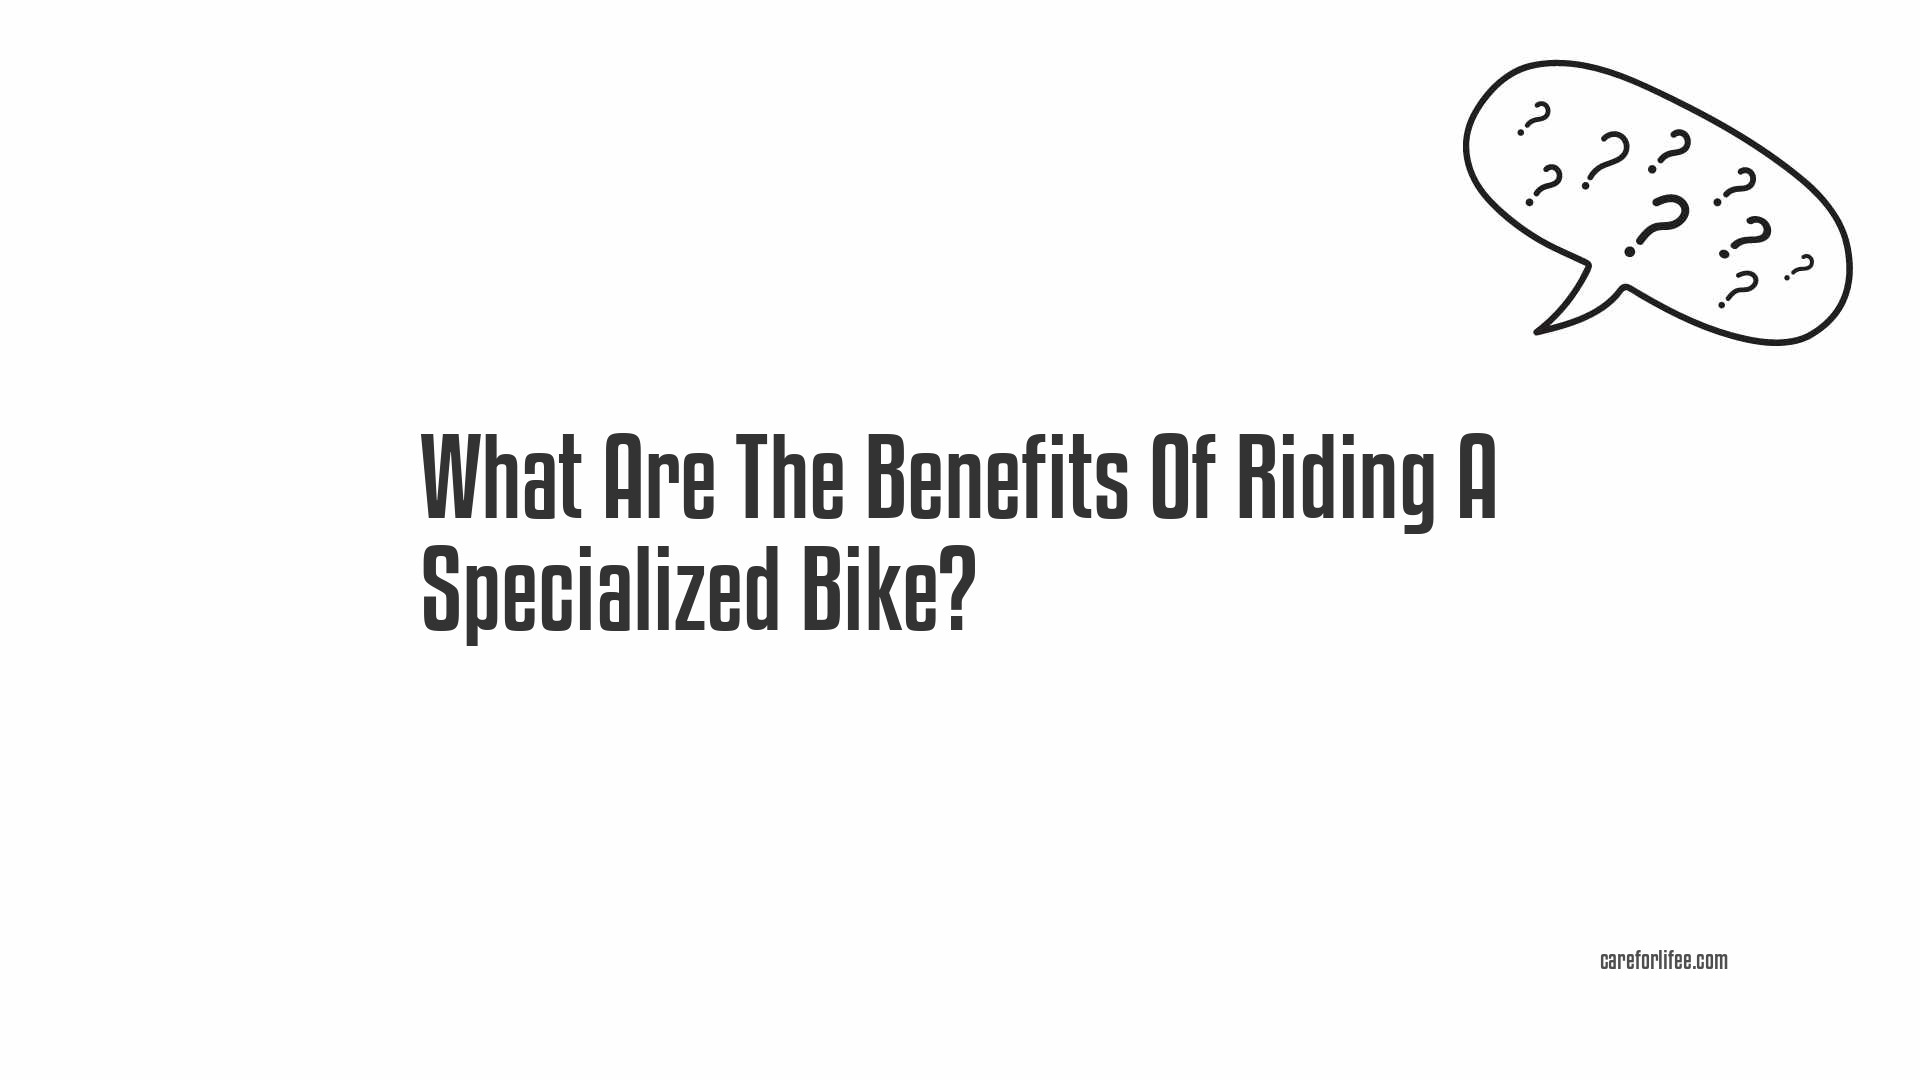 What Are The Benefits Of Riding A Specialized Bike?